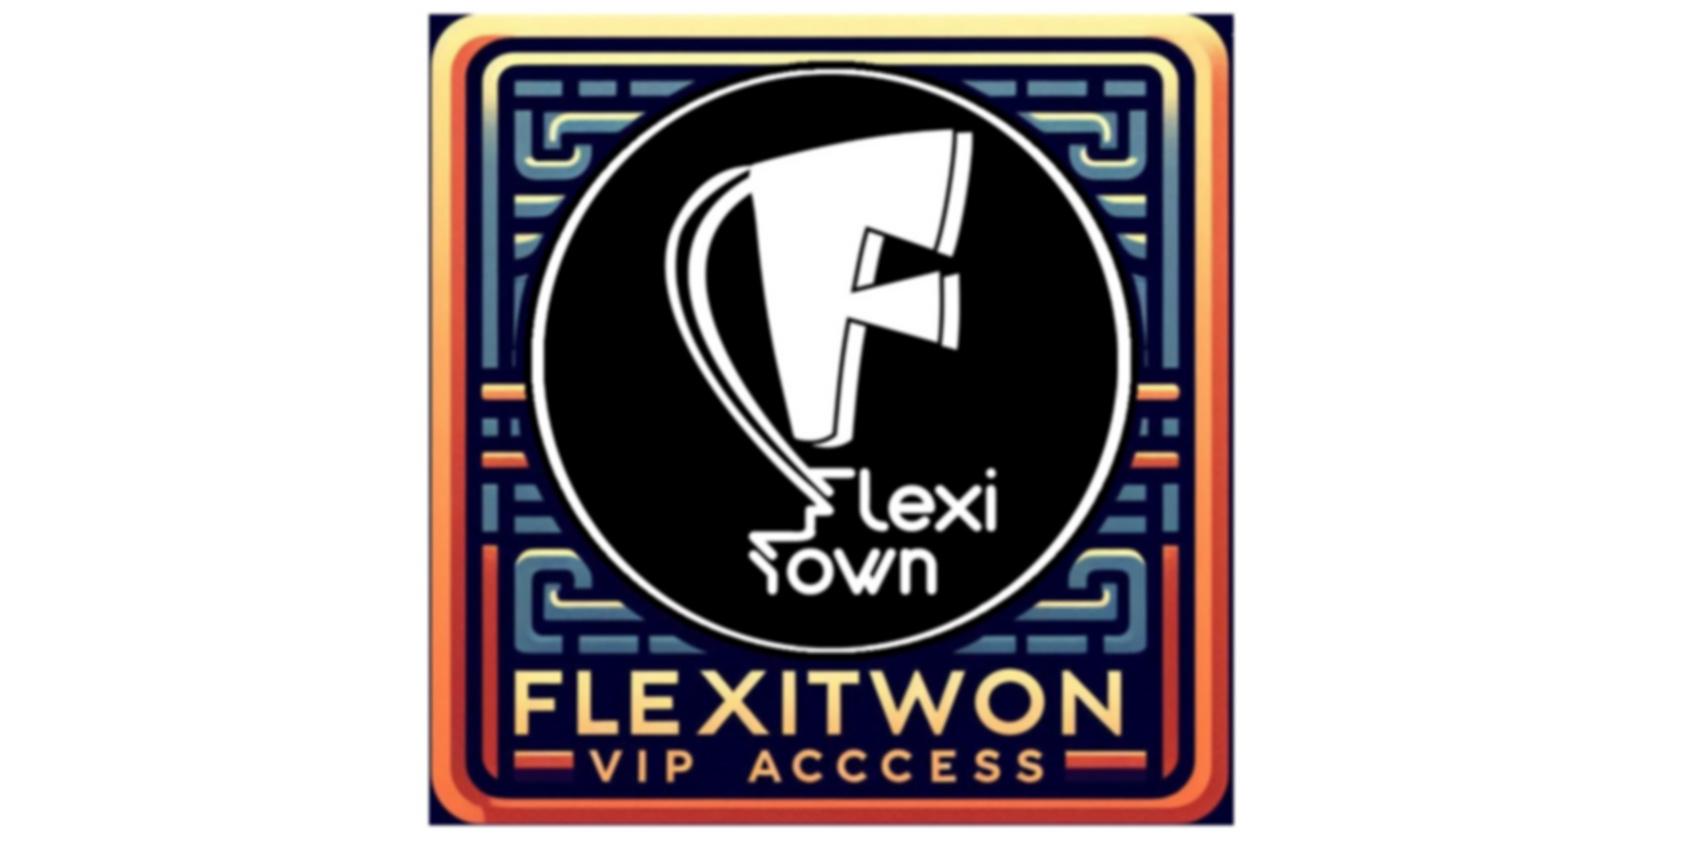 FlexiTown Commercial License + 5 Downloads per Month + Welcome Pack